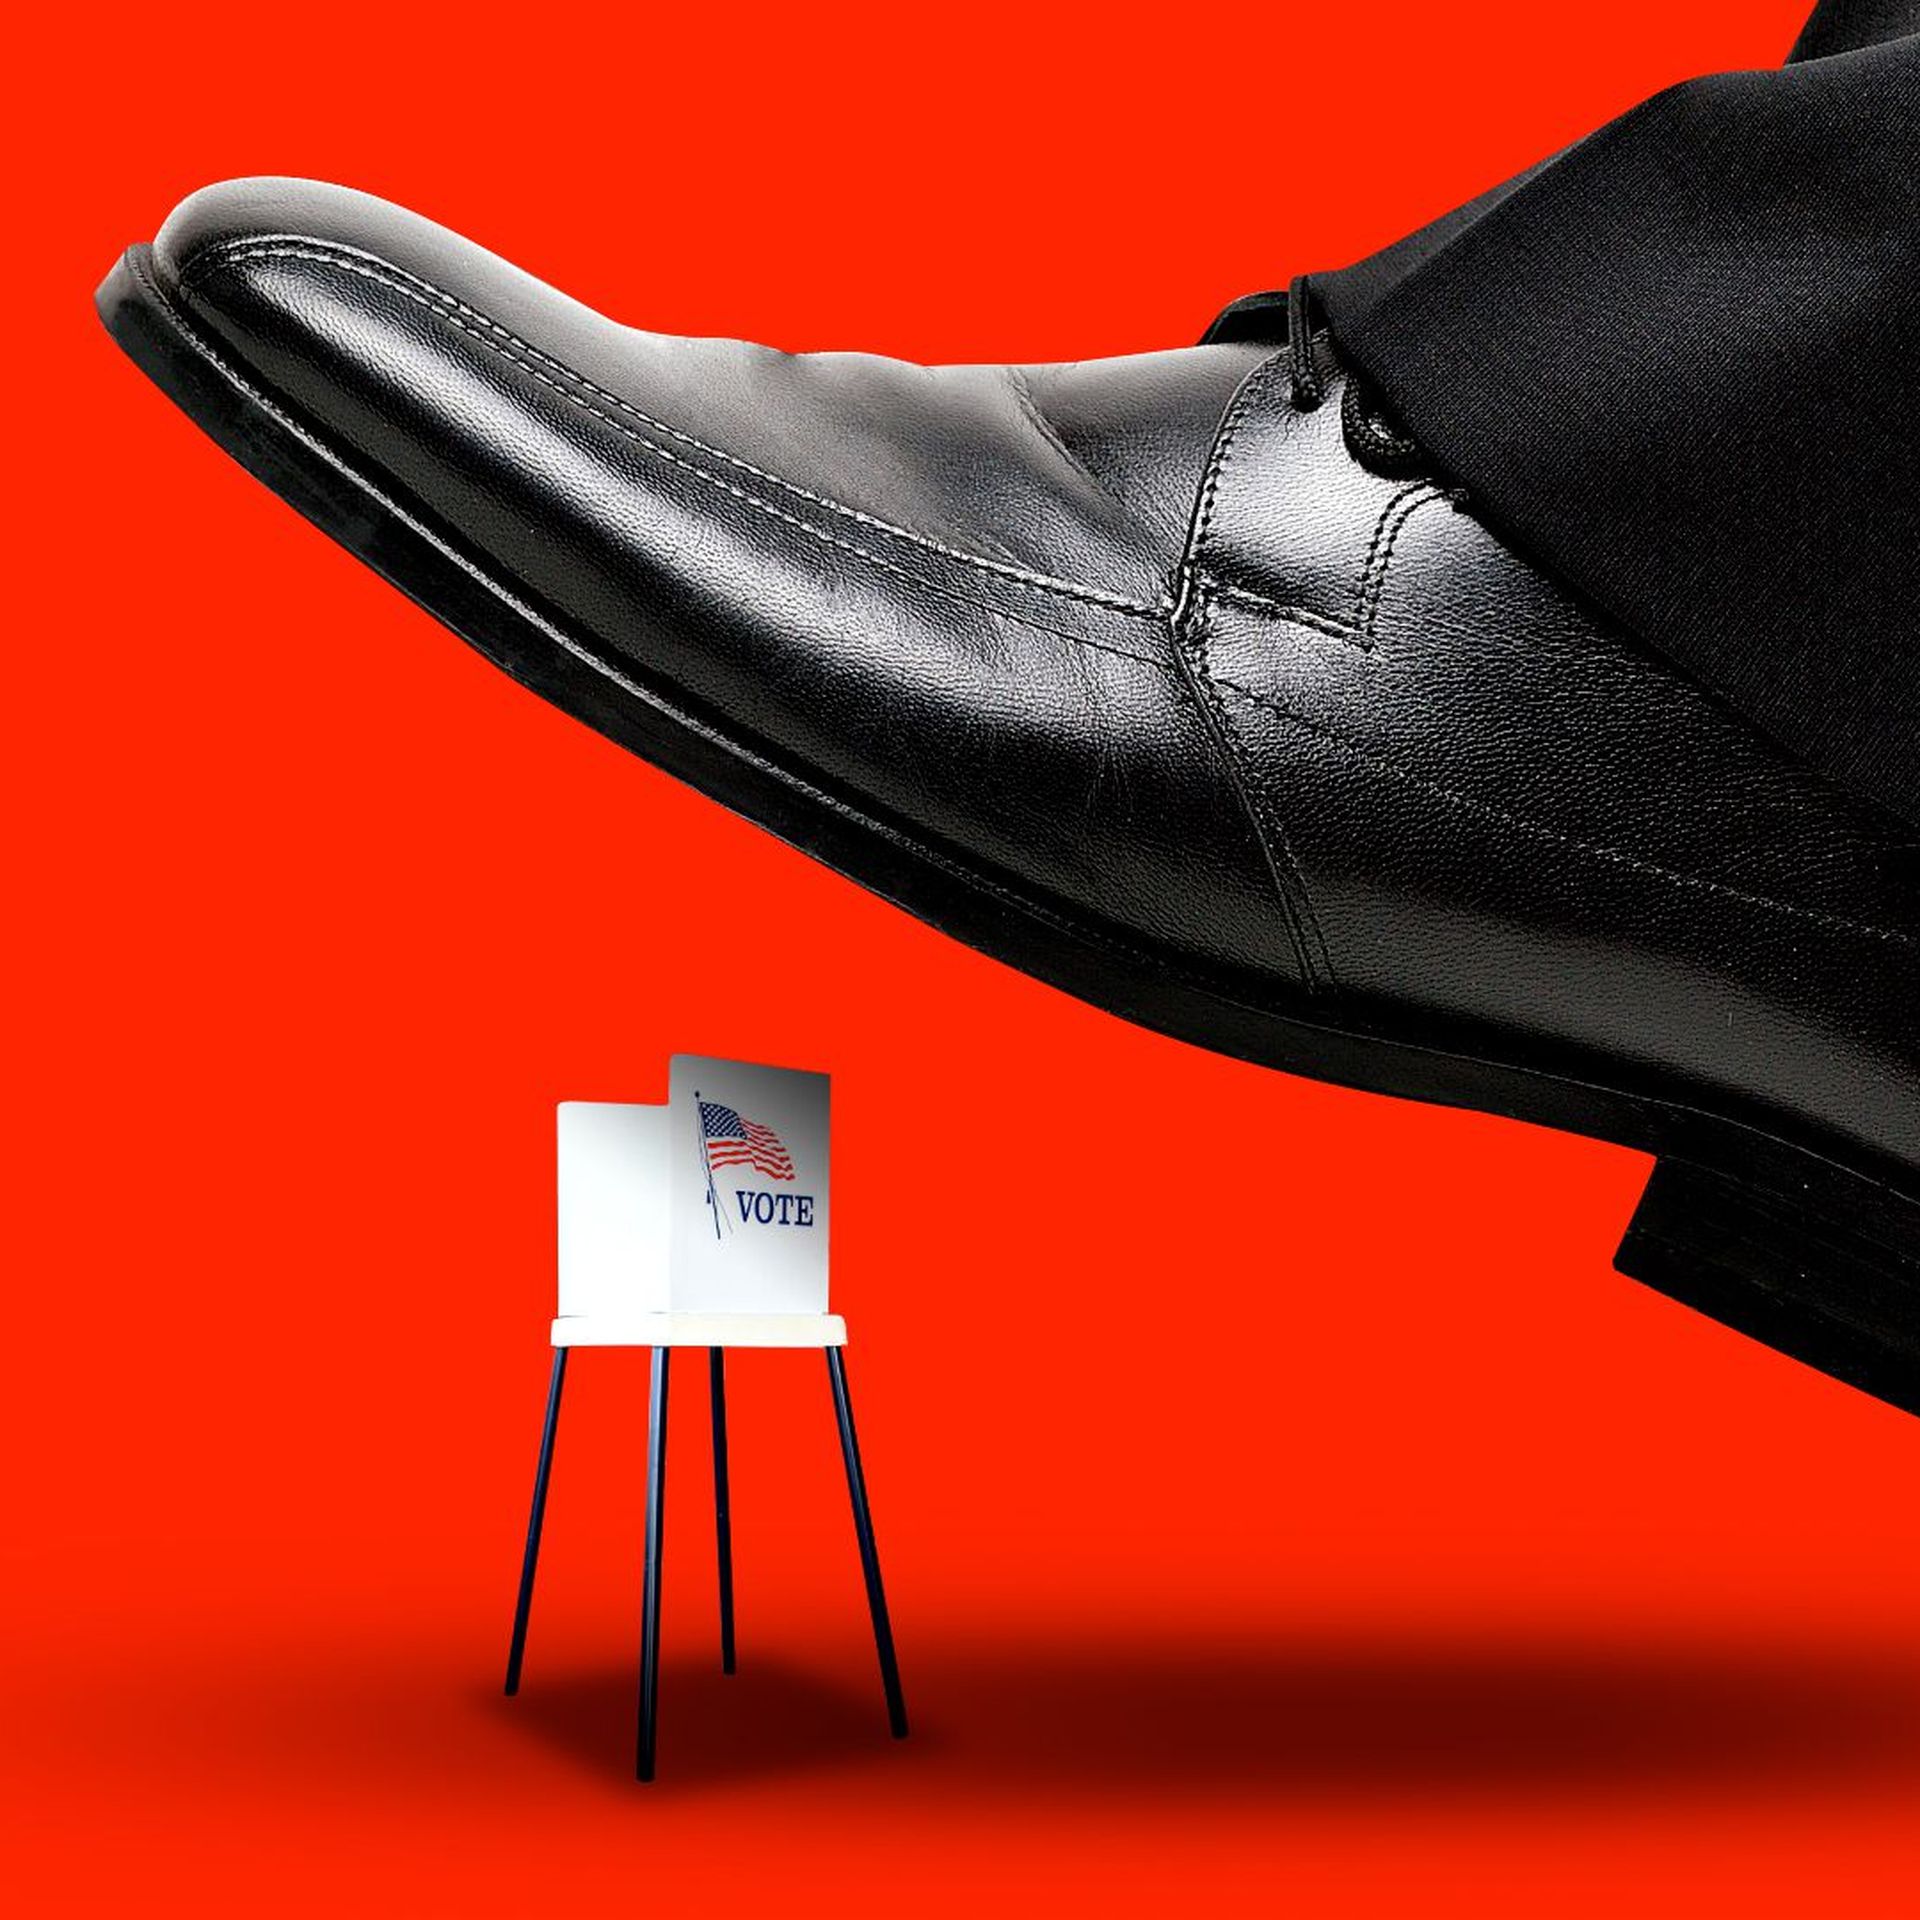 Illustration of a large shoe about to step on a tiny voting booth.  